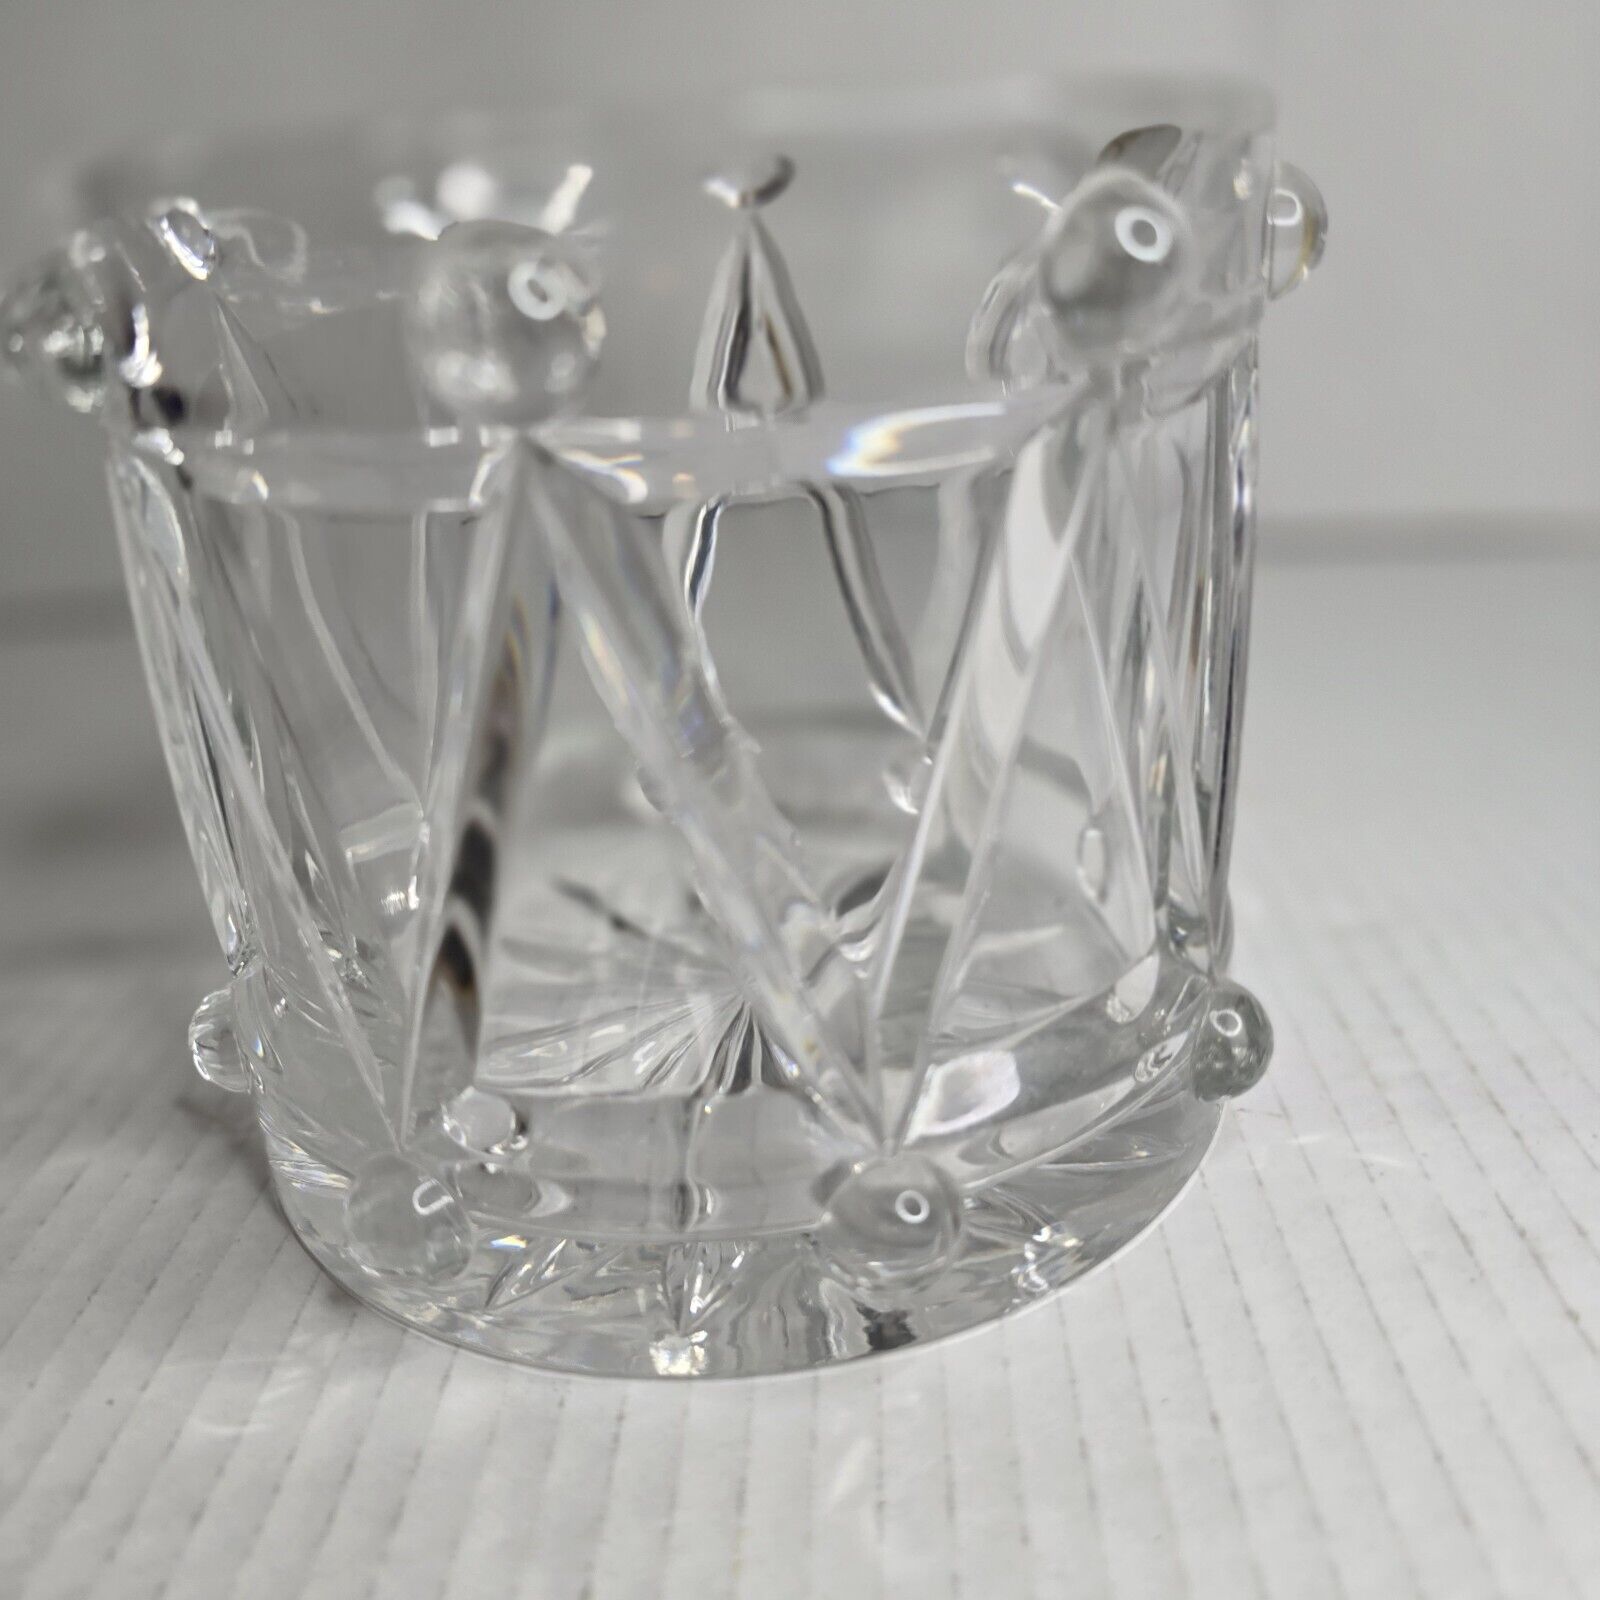 Vintage Teleflora 24% Clear Lead Crystal Glass Drum Dish Candy Vase Decor Gift